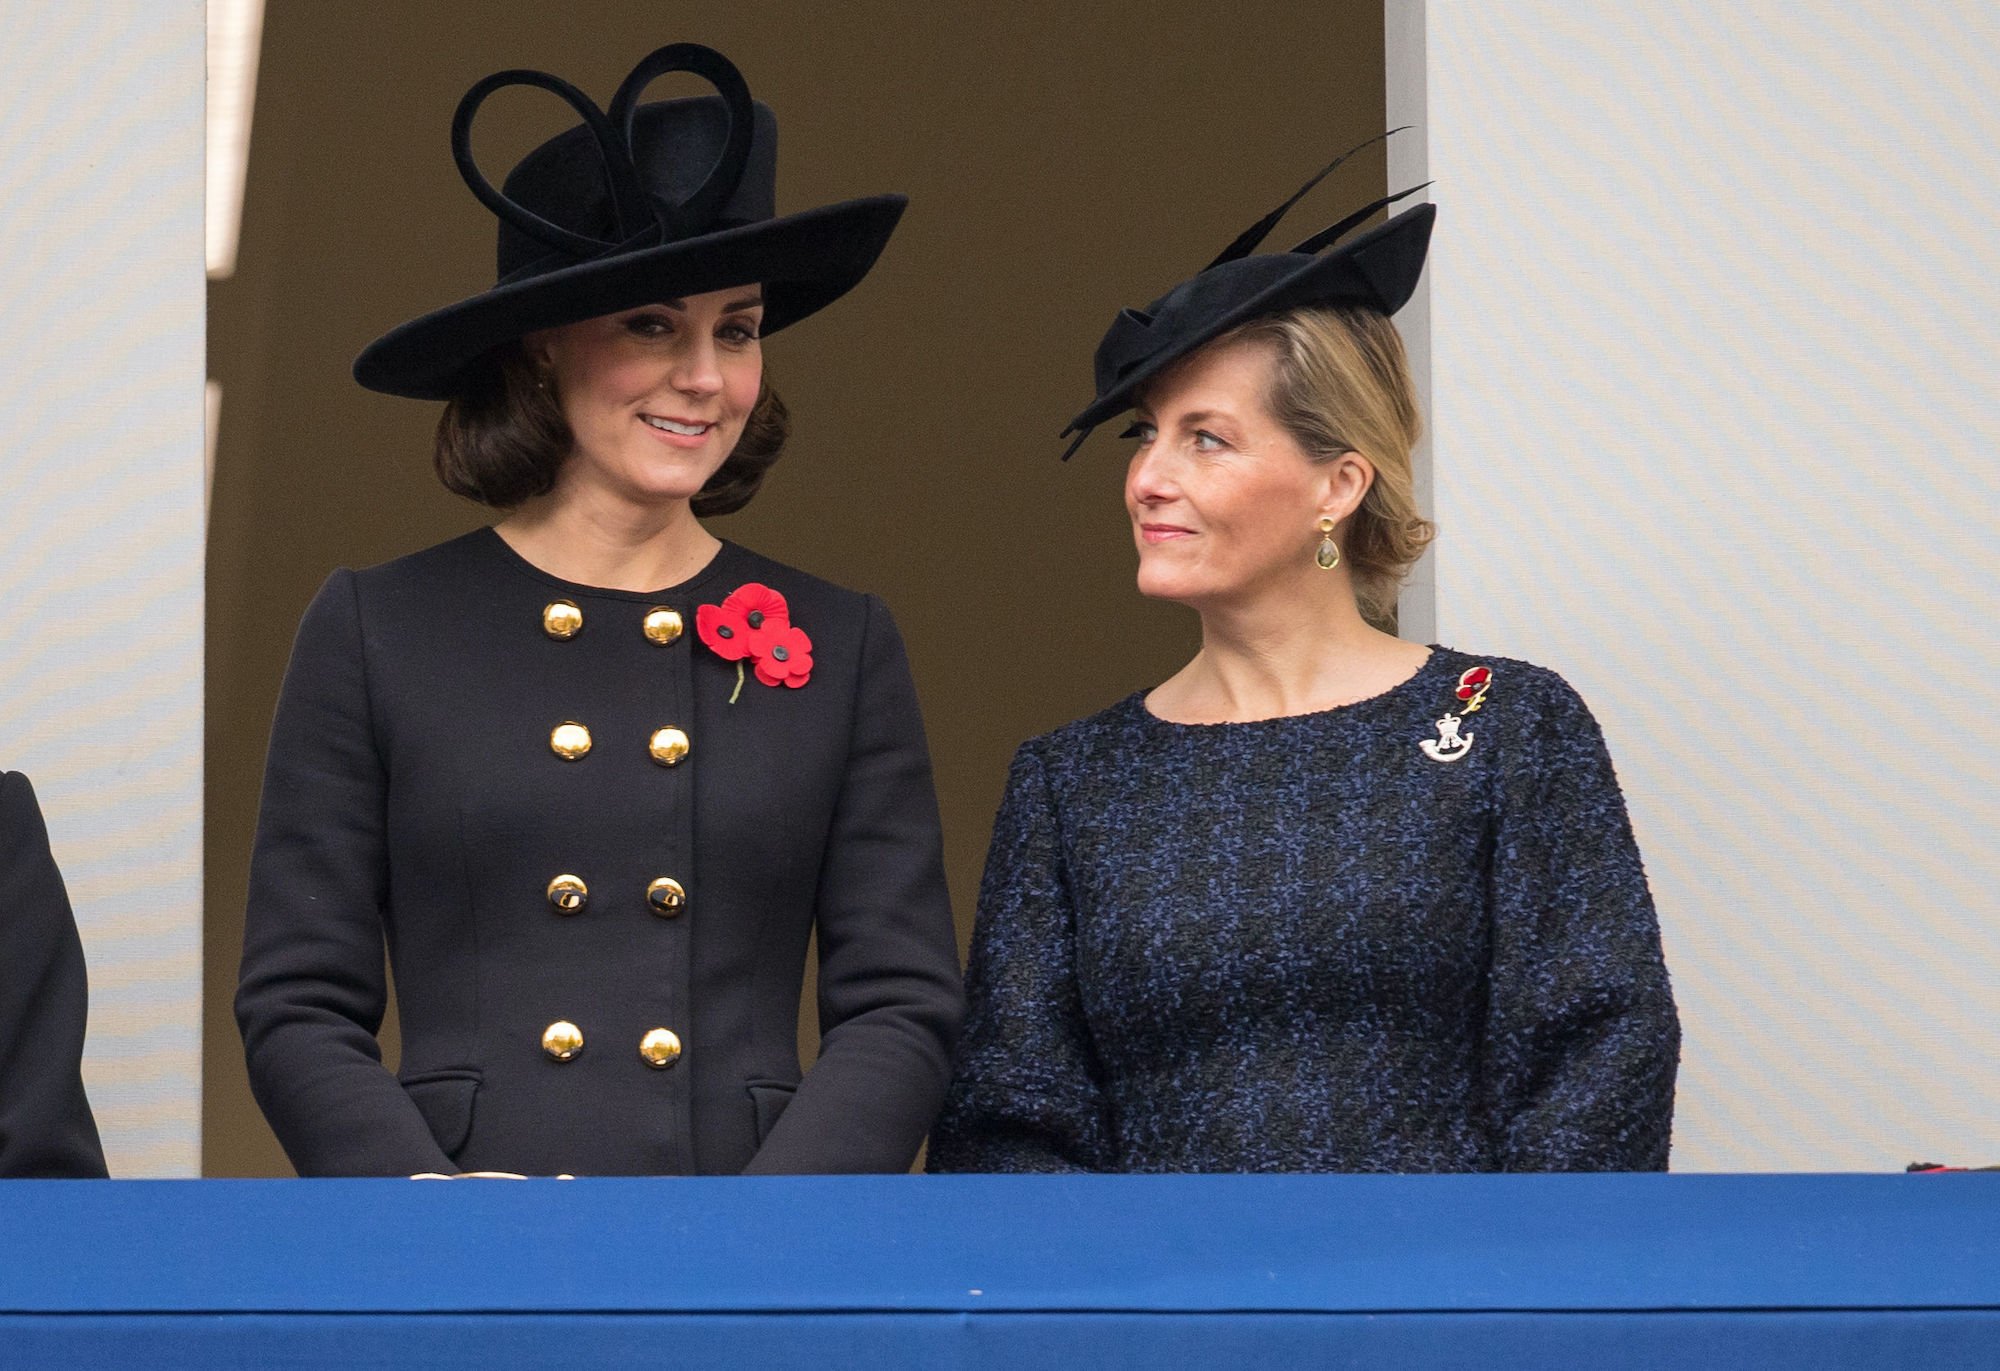 (L-R) Kate Middleton and Sophie, Countess of Wessex, smiling, looking down from a balcony